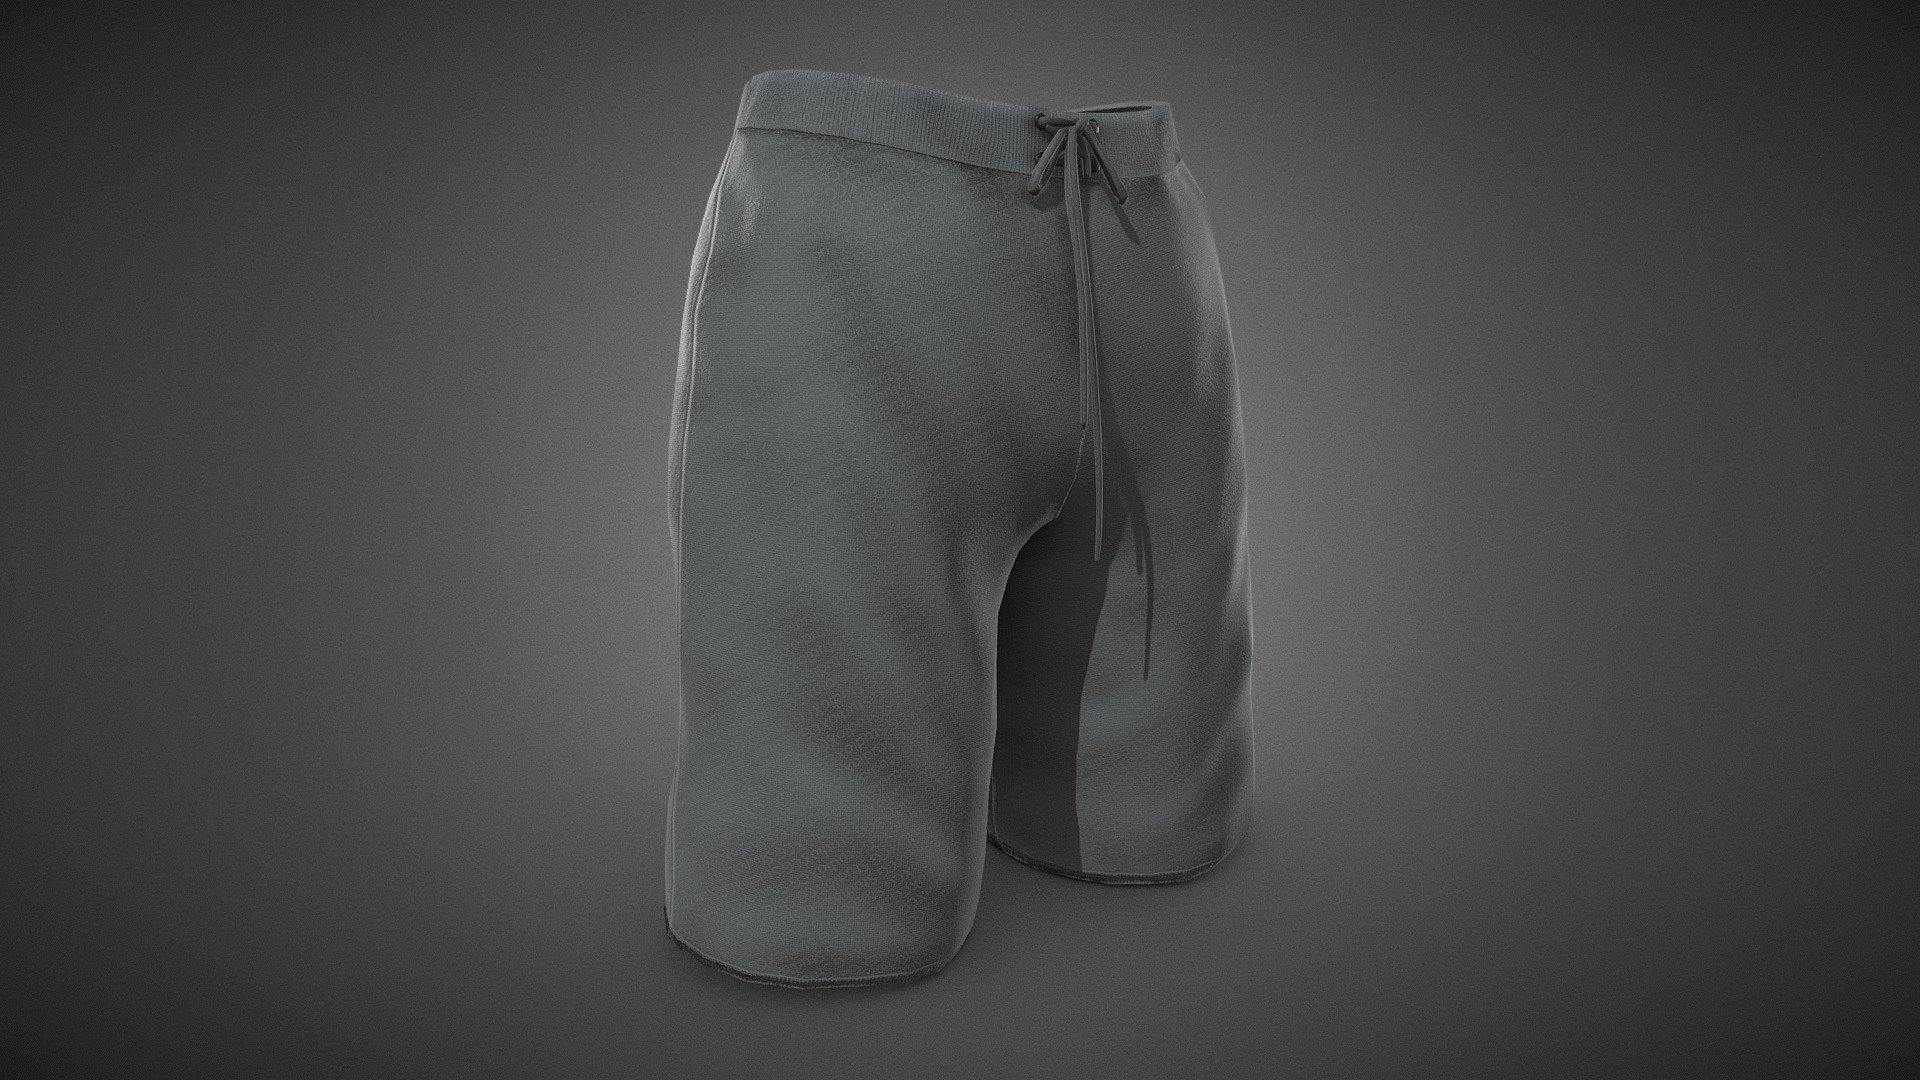 CG StudioX Present :
Gray Shorts lowpoly/PBR


This is Gray Shorts Comes with Specular and Metalness PBR.
The photo been rendered using Marmoset Toolbag 4 (real time game engine )

Features :

Comes with Specular and Metalness PBR 4K texture .
Good topology.
Low polygon geometry.
The Model is prefect for game for both Specular workflow as in Unity and Metalness as in Unreal engine .
The model also rendered using Marmoset Toolbag 4 with both Specular and Metalness PBR and also included in the product with the full texture.
The texture can be easily adjustable .

Texture :

One set of UV [Albedo -Normal-Metalness -Roughness-Gloss-Specular-Ao] (4096*4096)

Files :
Marmoset Toolbag 4 ,Maya,,FBX,OBj with all the textures.


Contact me for if you have any questions.
 - Gray Shorts - Buy Royalty Free 3D model by CG StudioX (@CG_StudioX) 3d model